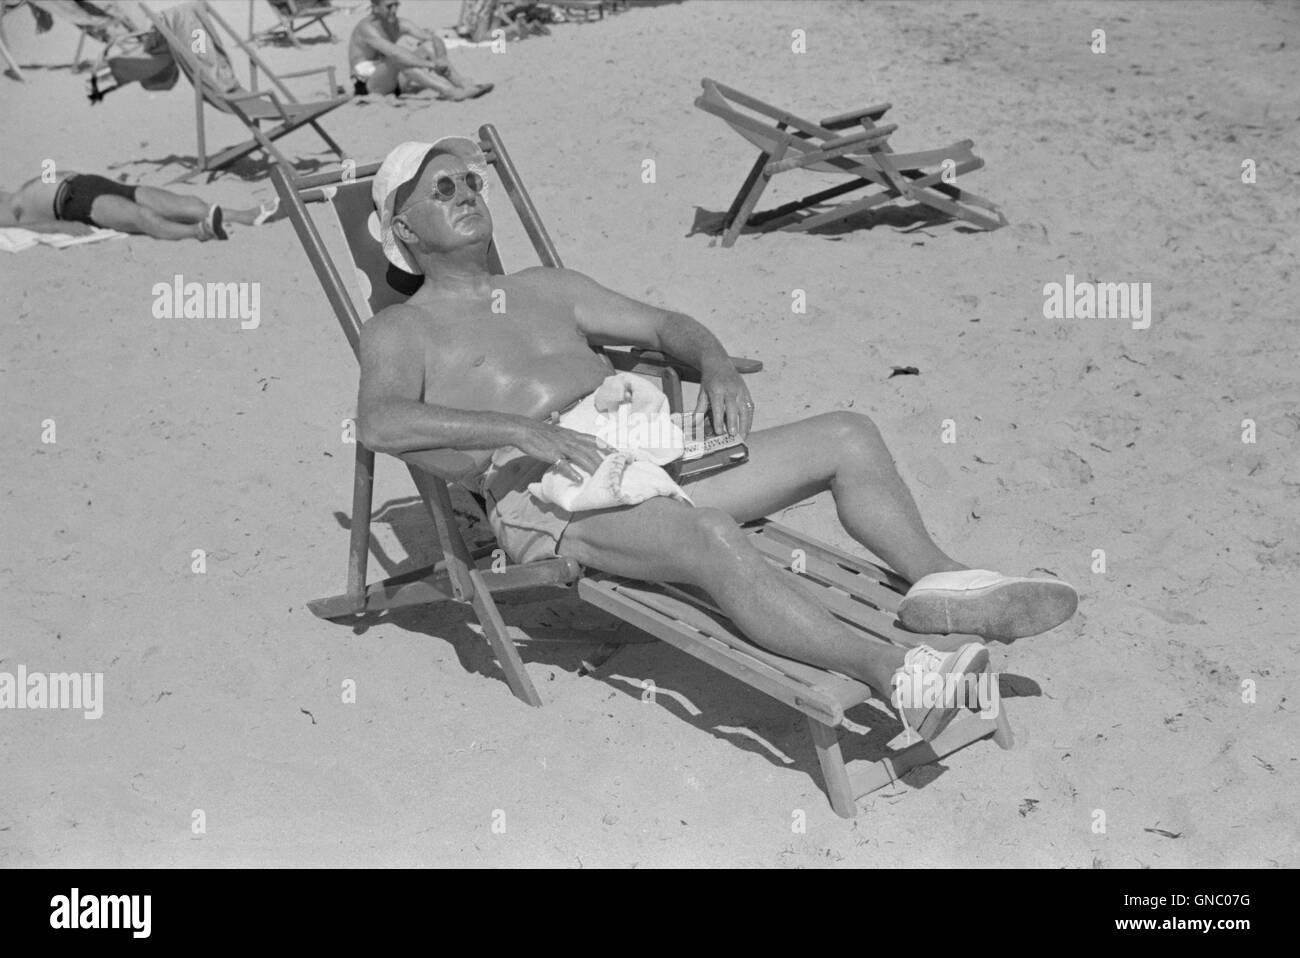 Man Sunbathing on Beach, Miami Beach, Floride, USA, Marion Post Wolcott pour Farm Security Administration, Mars 1939 Banque D'Images